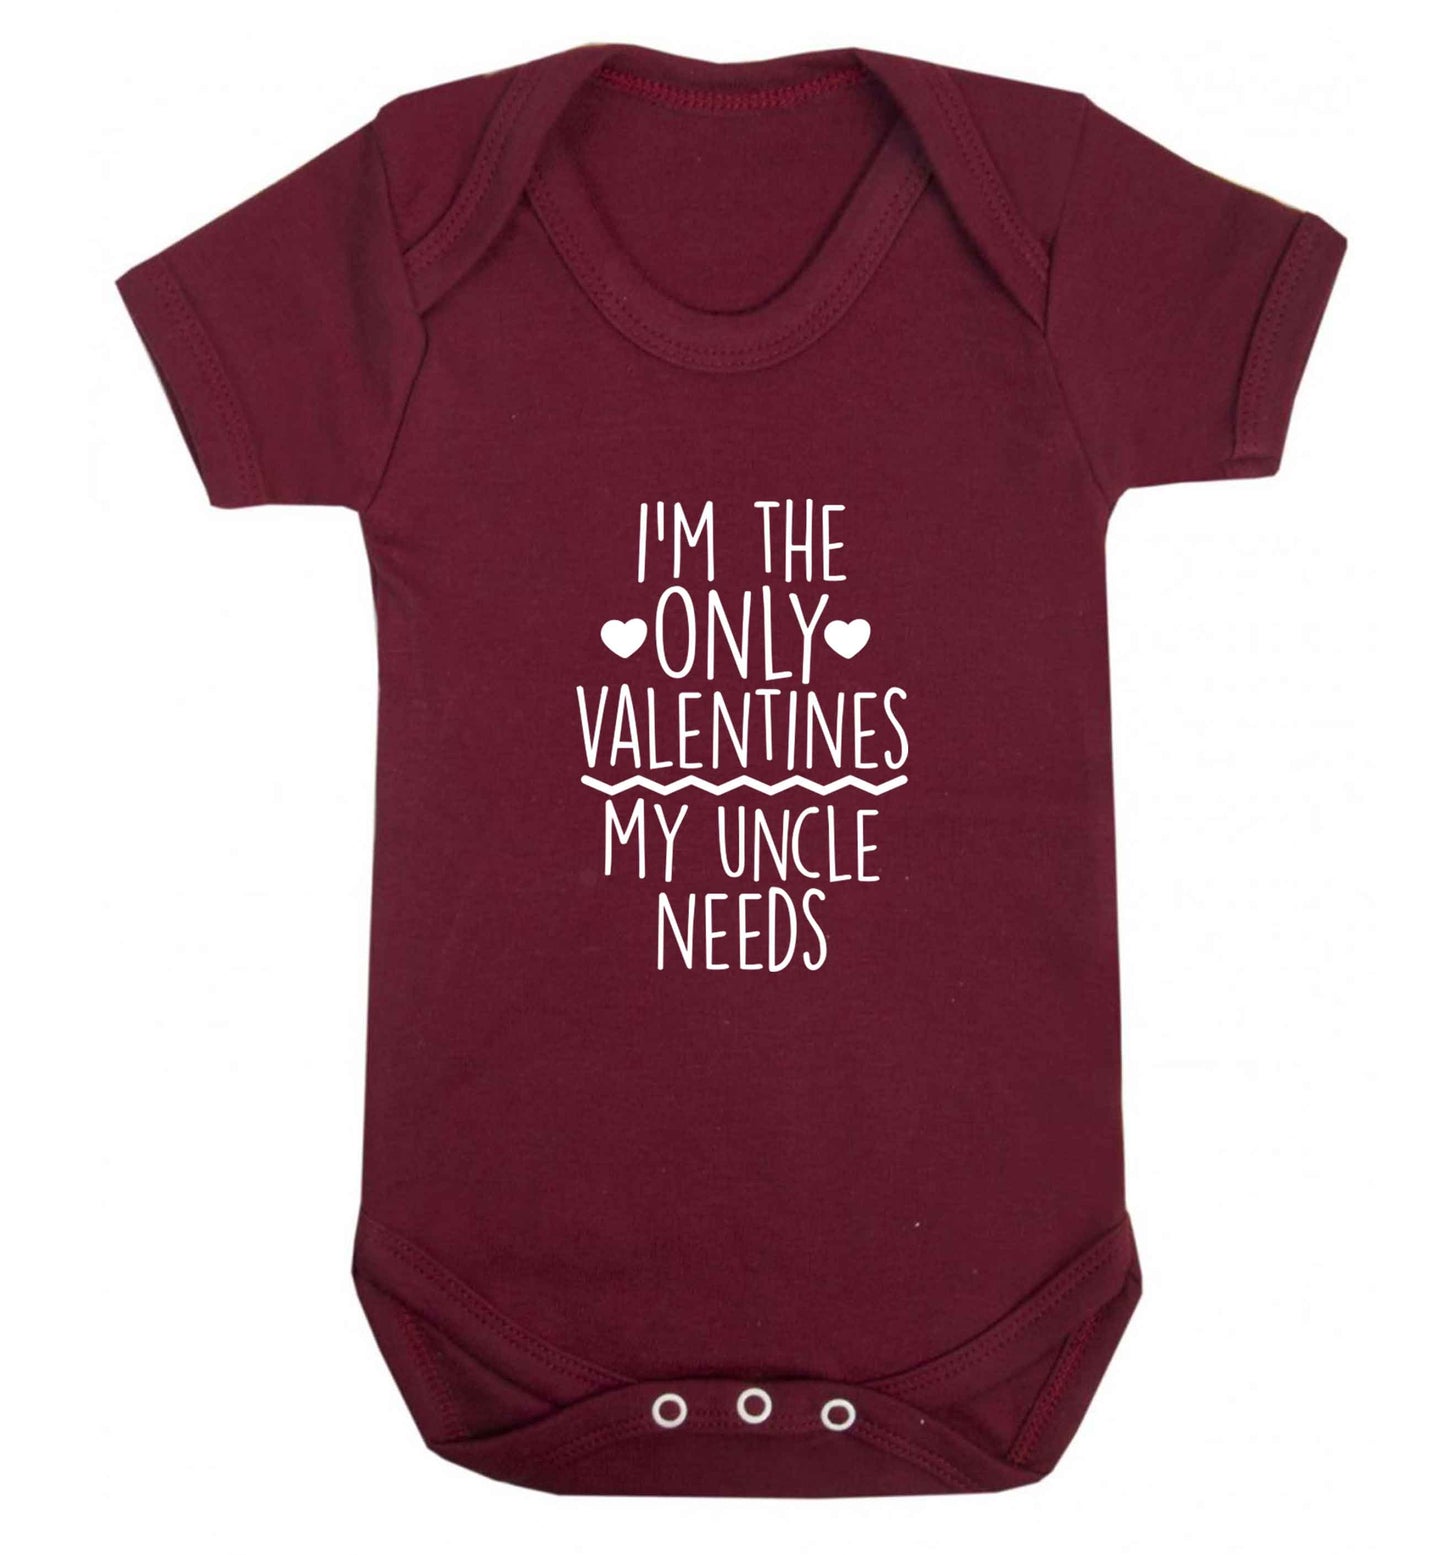 I'm the only valentines my uncle needs baby vest maroon 18-24 months